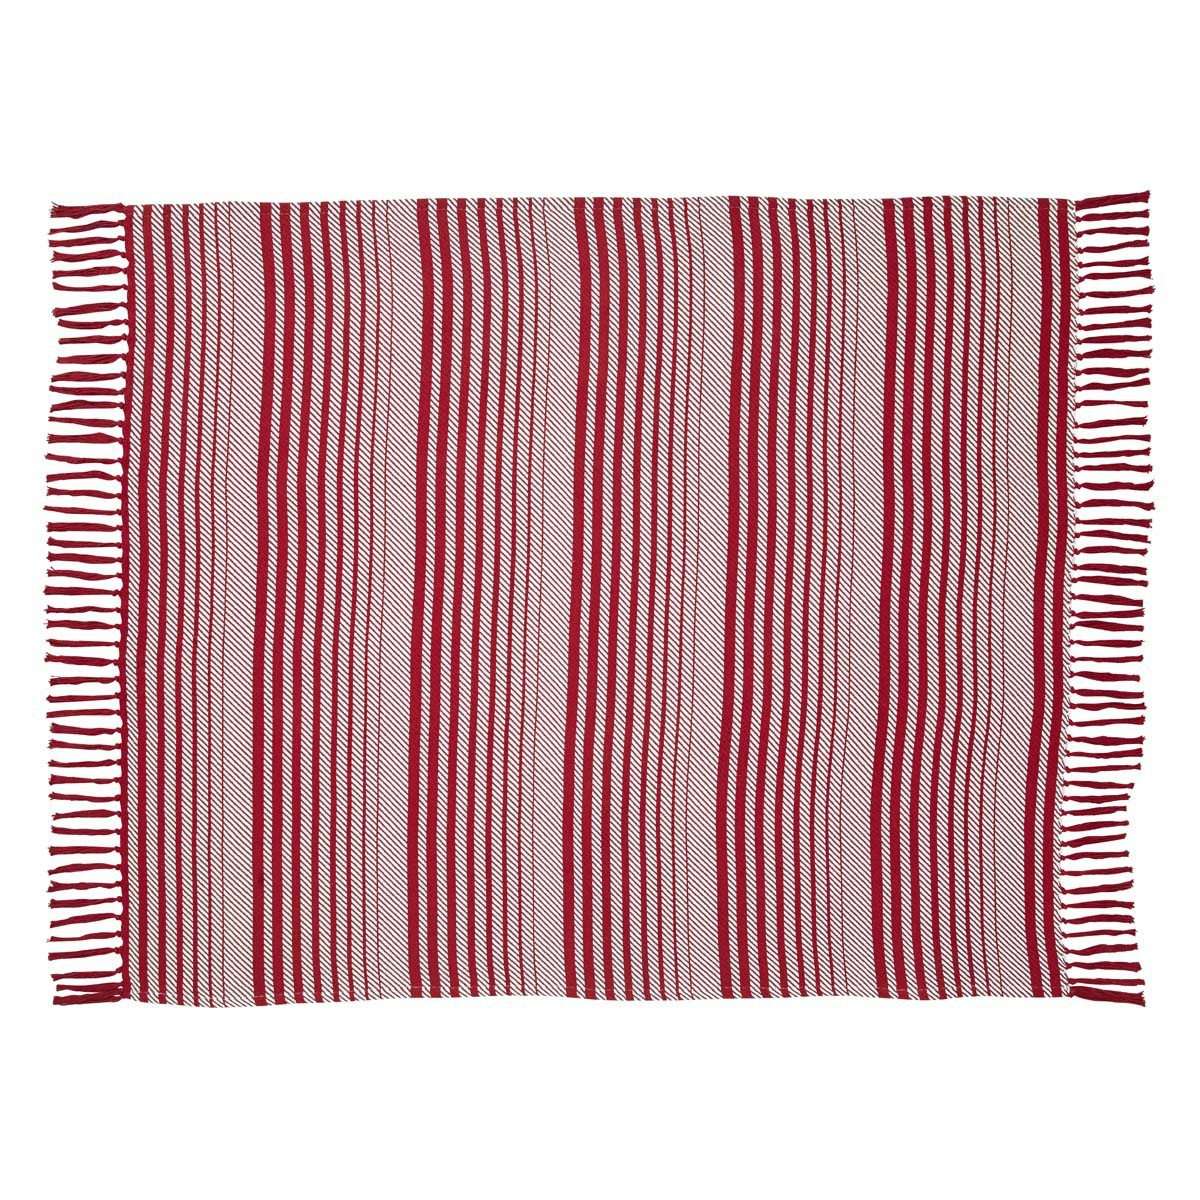 Whimsical Candy Cane Stripe Woven Throw 60" x 50" VHC Brands - The Fox Decor